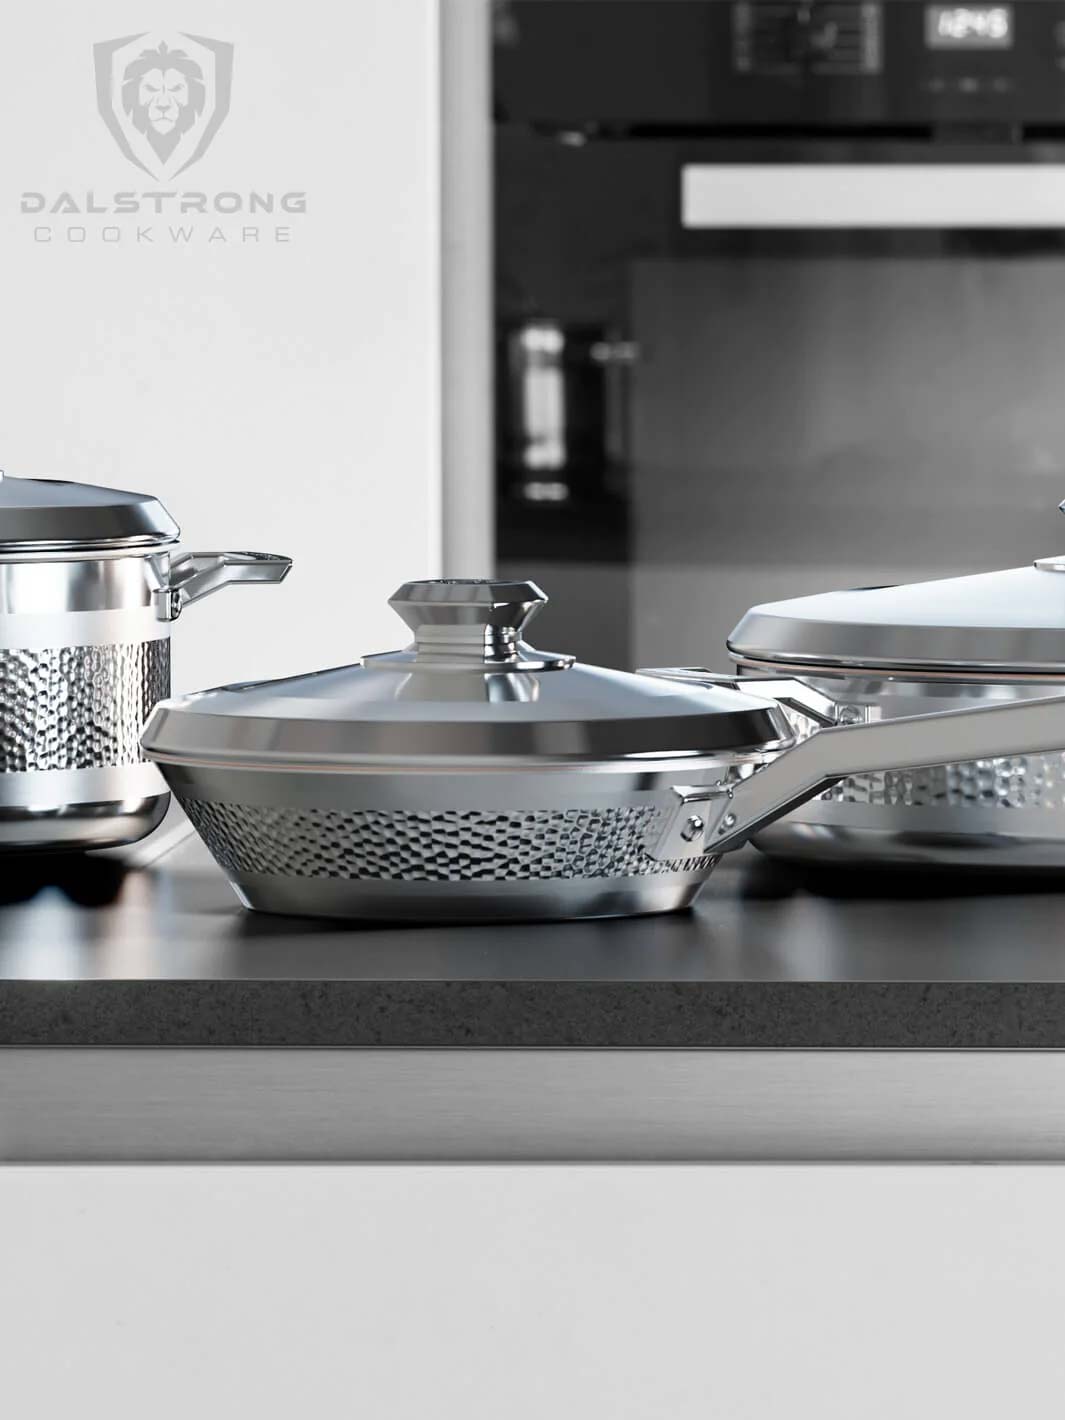 Dalstrong avalon series 6 piece cookware set silver on a marble table.